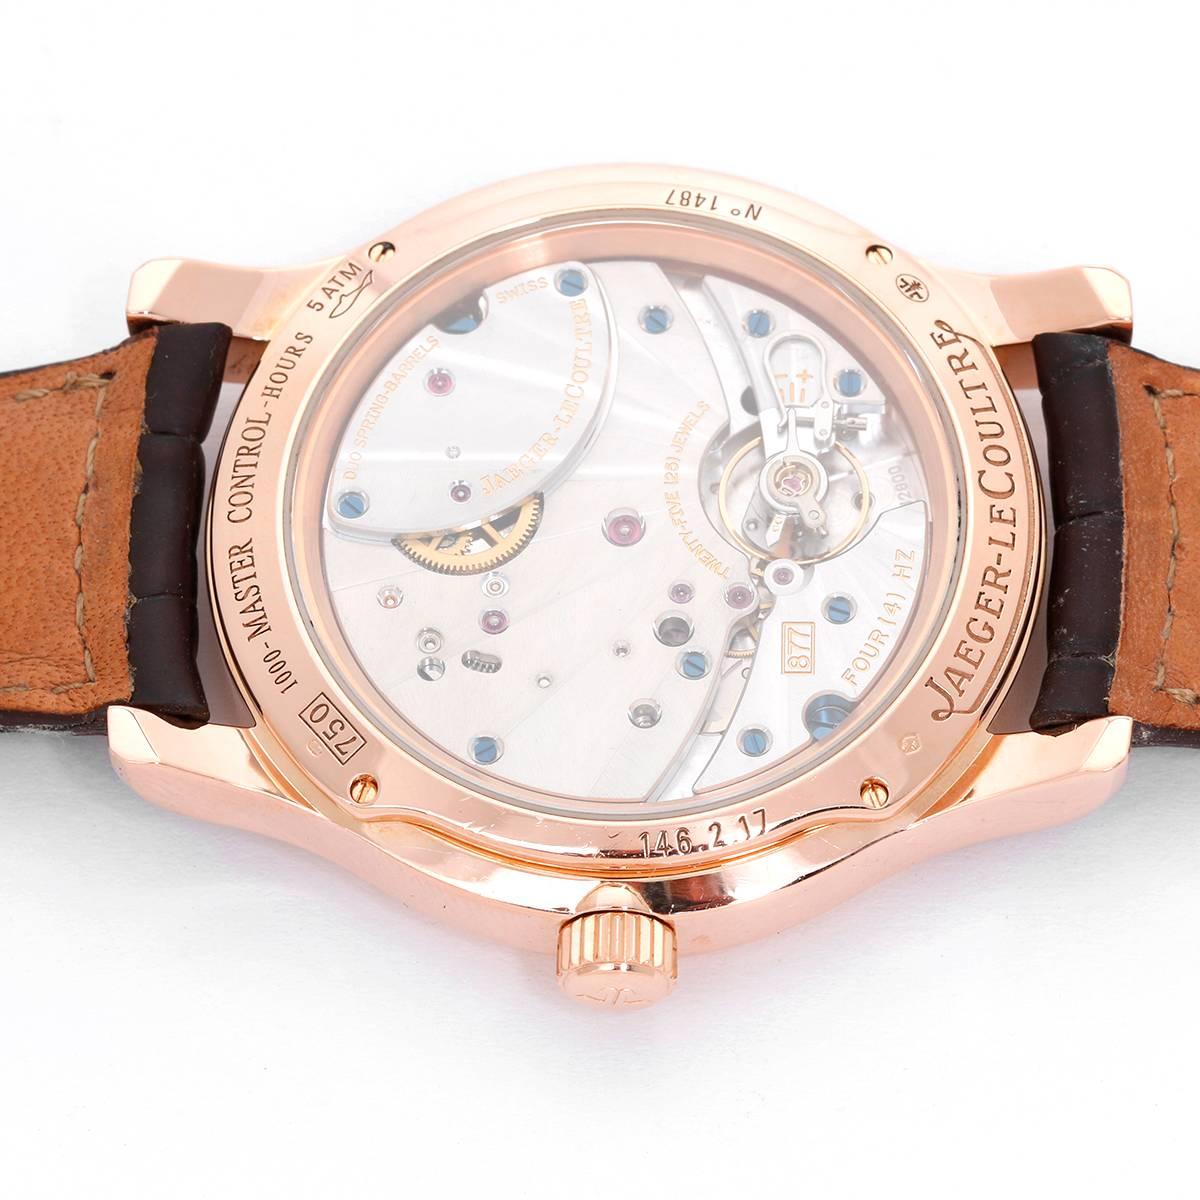 Jaeger-LeCoultre Master Eight Days Rose Gold Men's Watch Q1602420 -  Automatic winding, Date, Day/Night Indicator, Power Reserve Indicator. Rose gold case (42mm diameter). Silvered dial with arrow shaped markers. Strap band with rose gold deployant